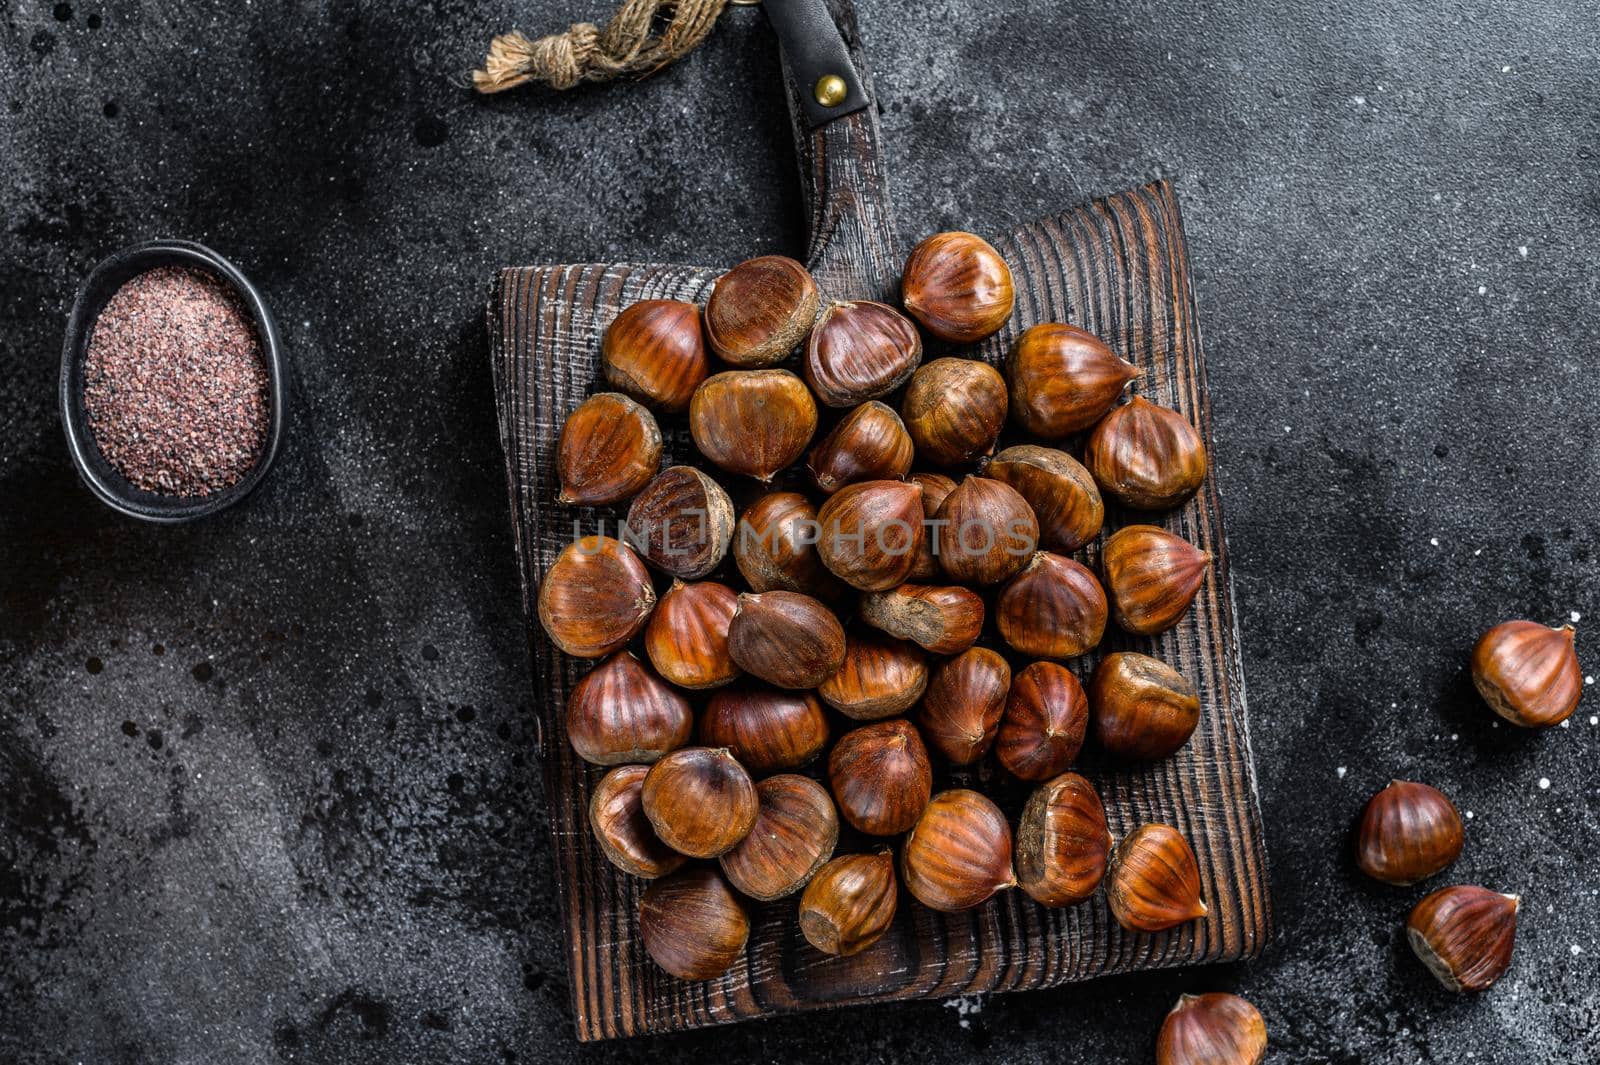 Raw chestnuts on a wooden cutting board. Black background. Top view.